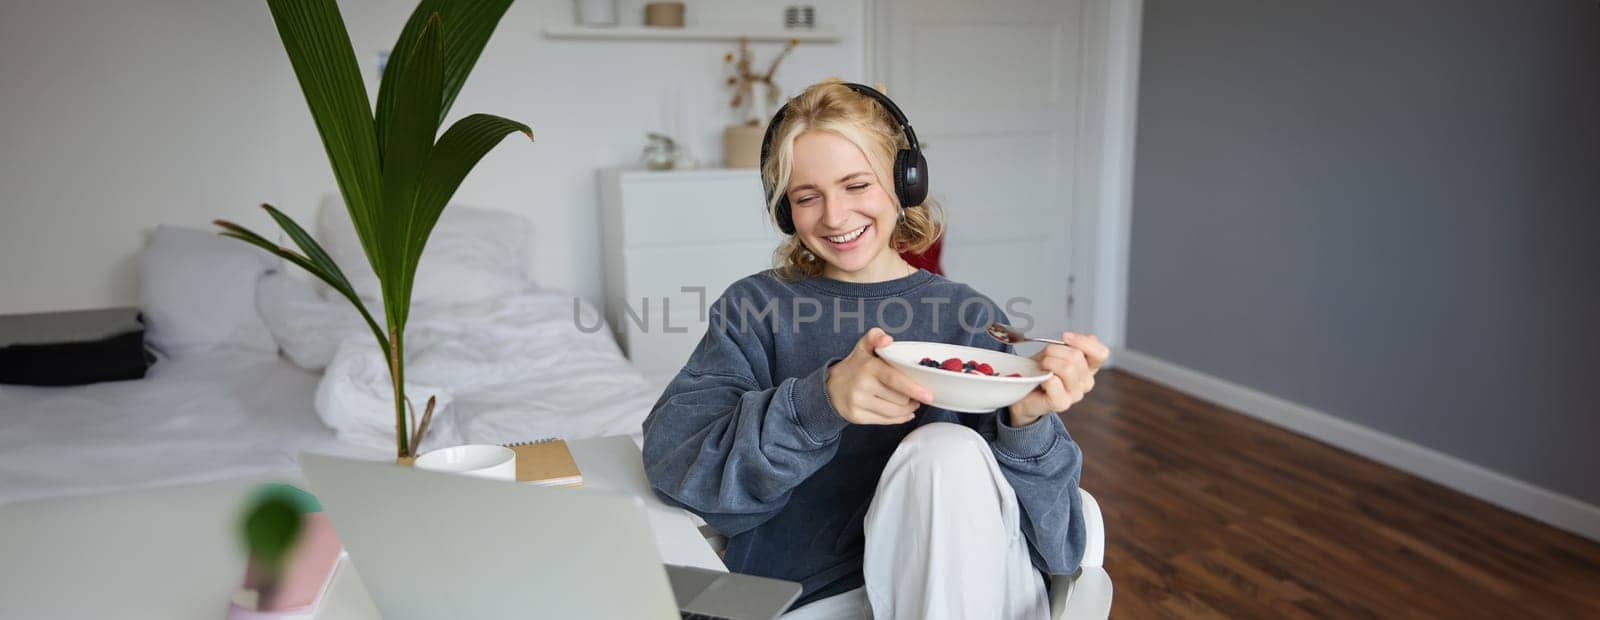 Portrait of smiling young woman, watching tv show in headphones, eating breakfast and looking at laptop screen.